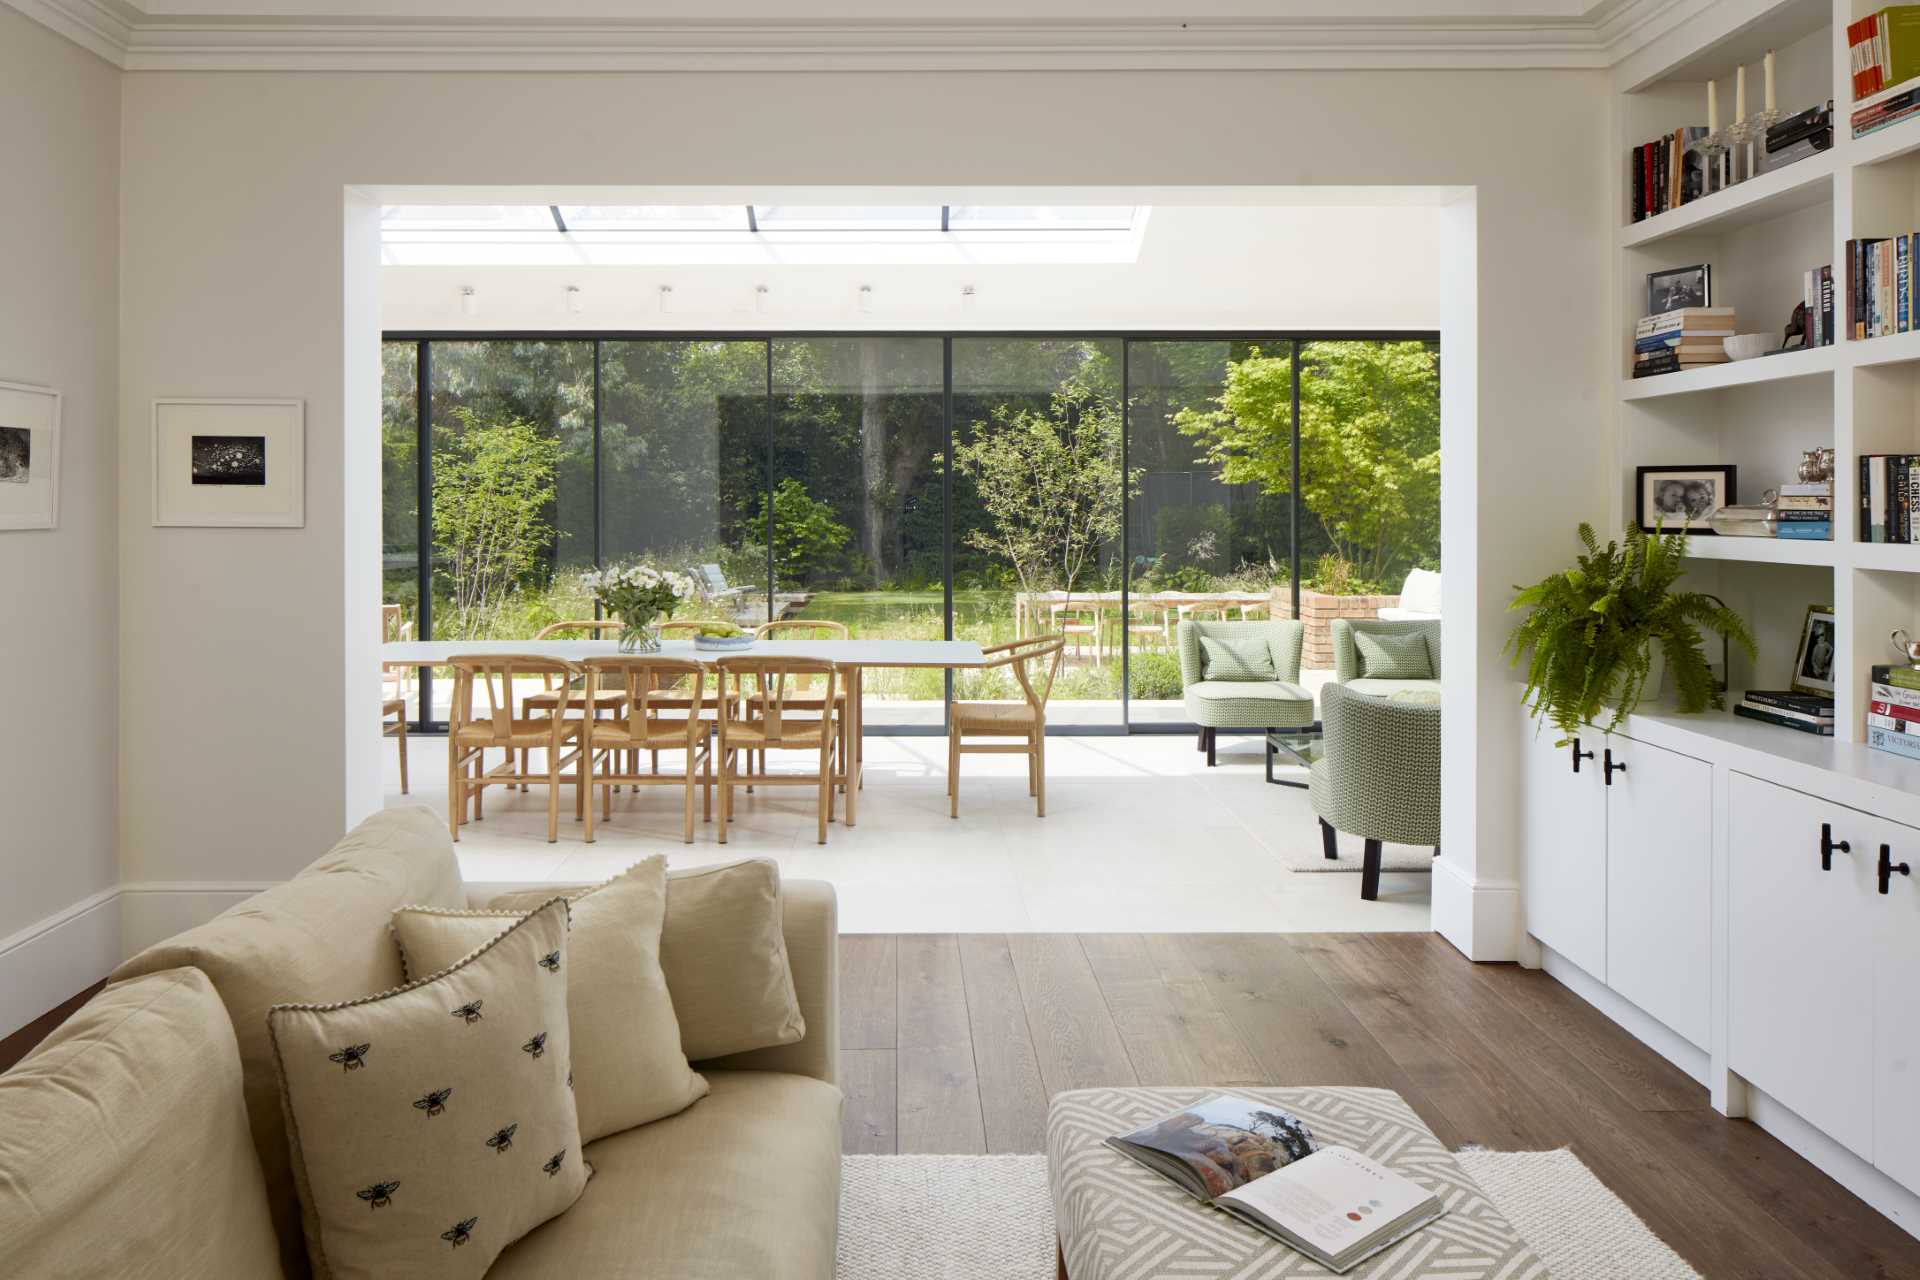 A casual living room with built-in cabinets and shelving, has a view of the light-filled addition and the garden beyond.